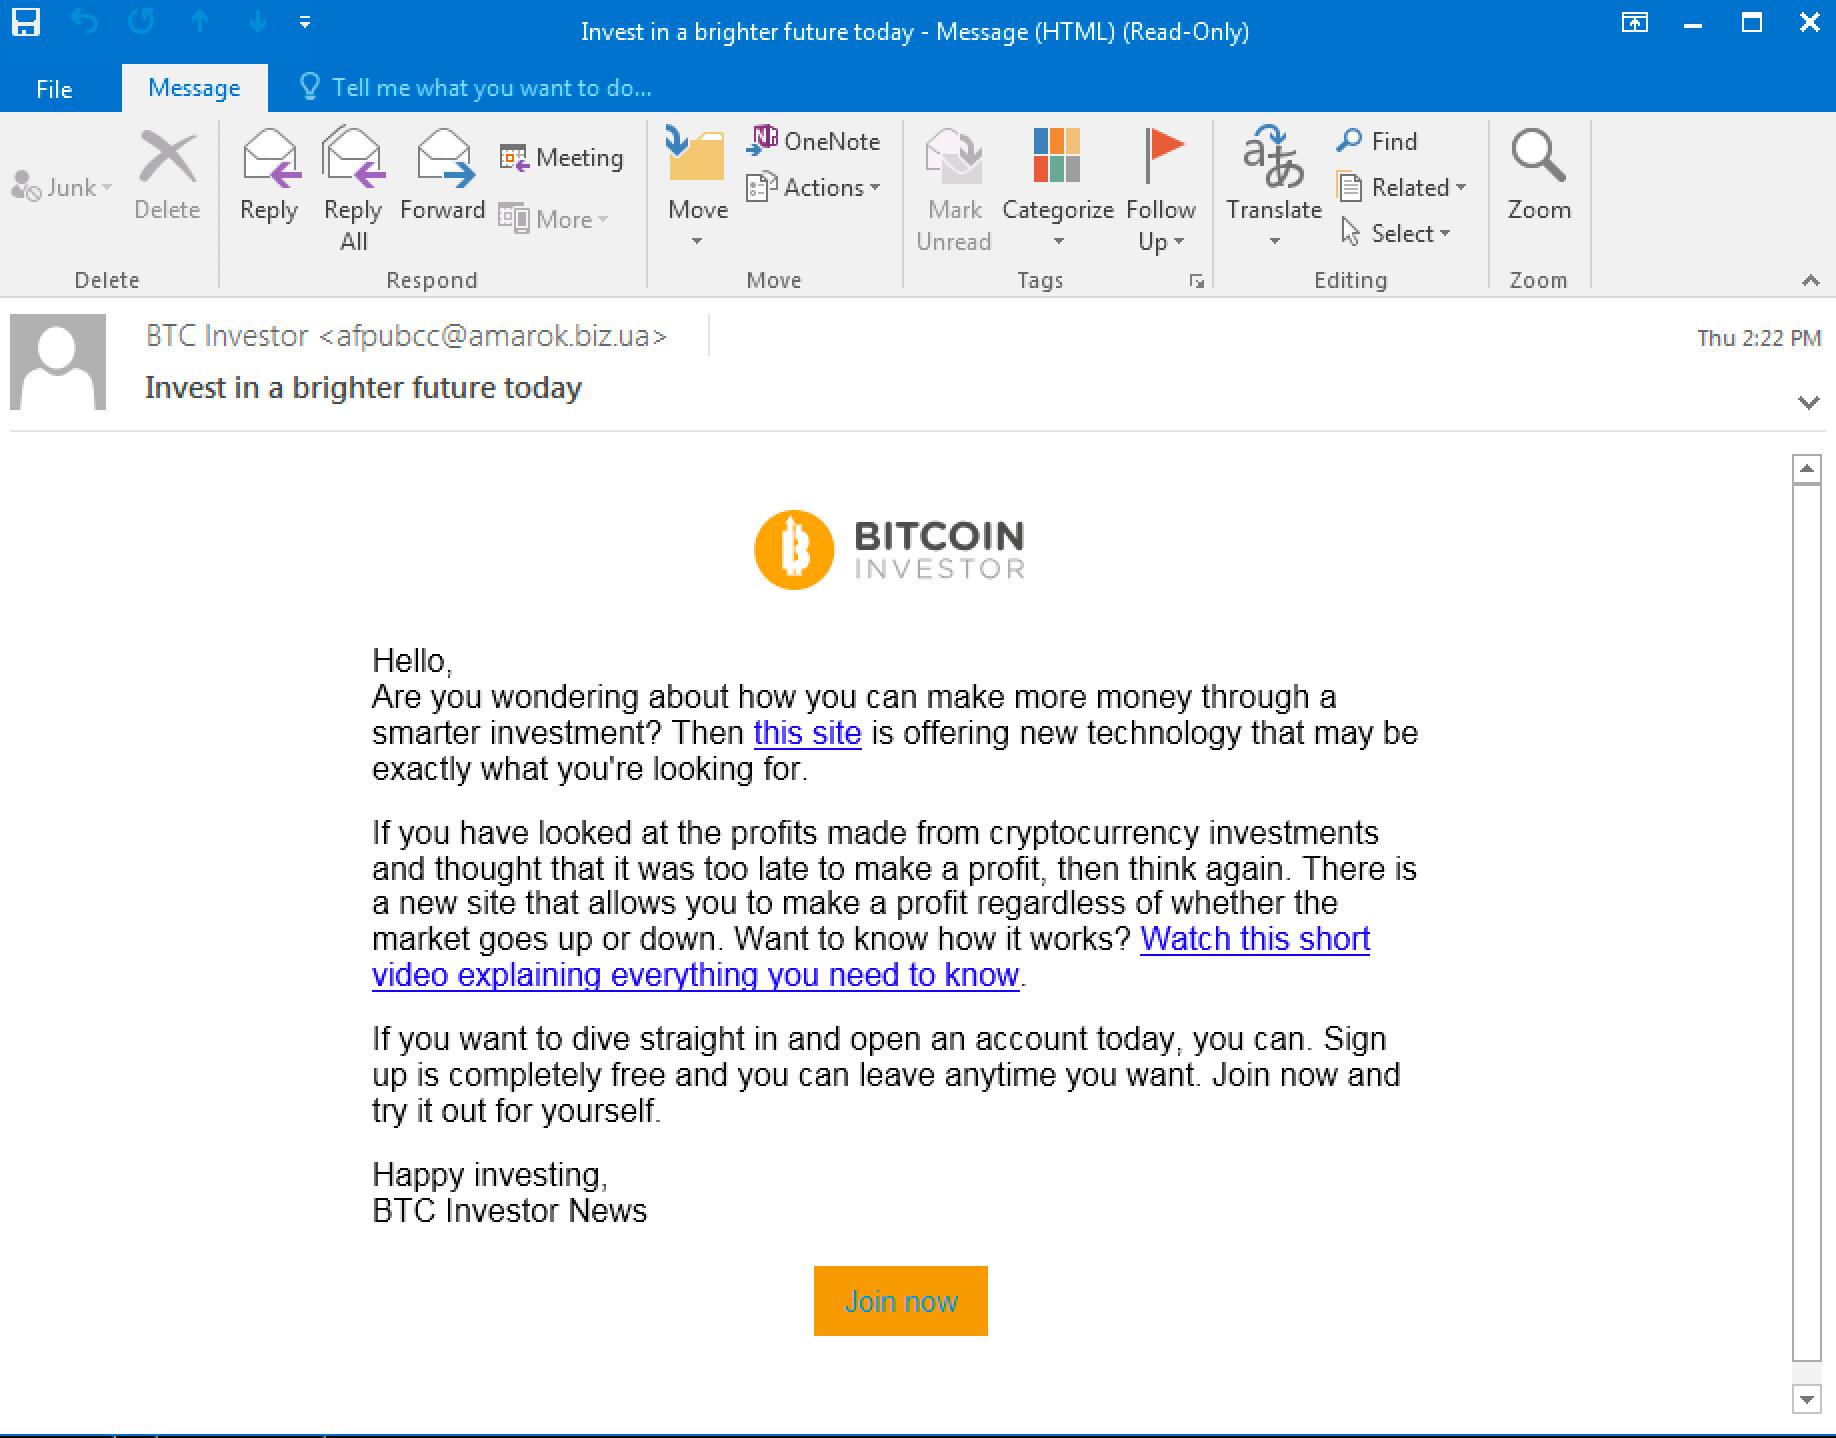 Banks In Peru Hit By Phishing Attack Using Bitcoin Advertisements